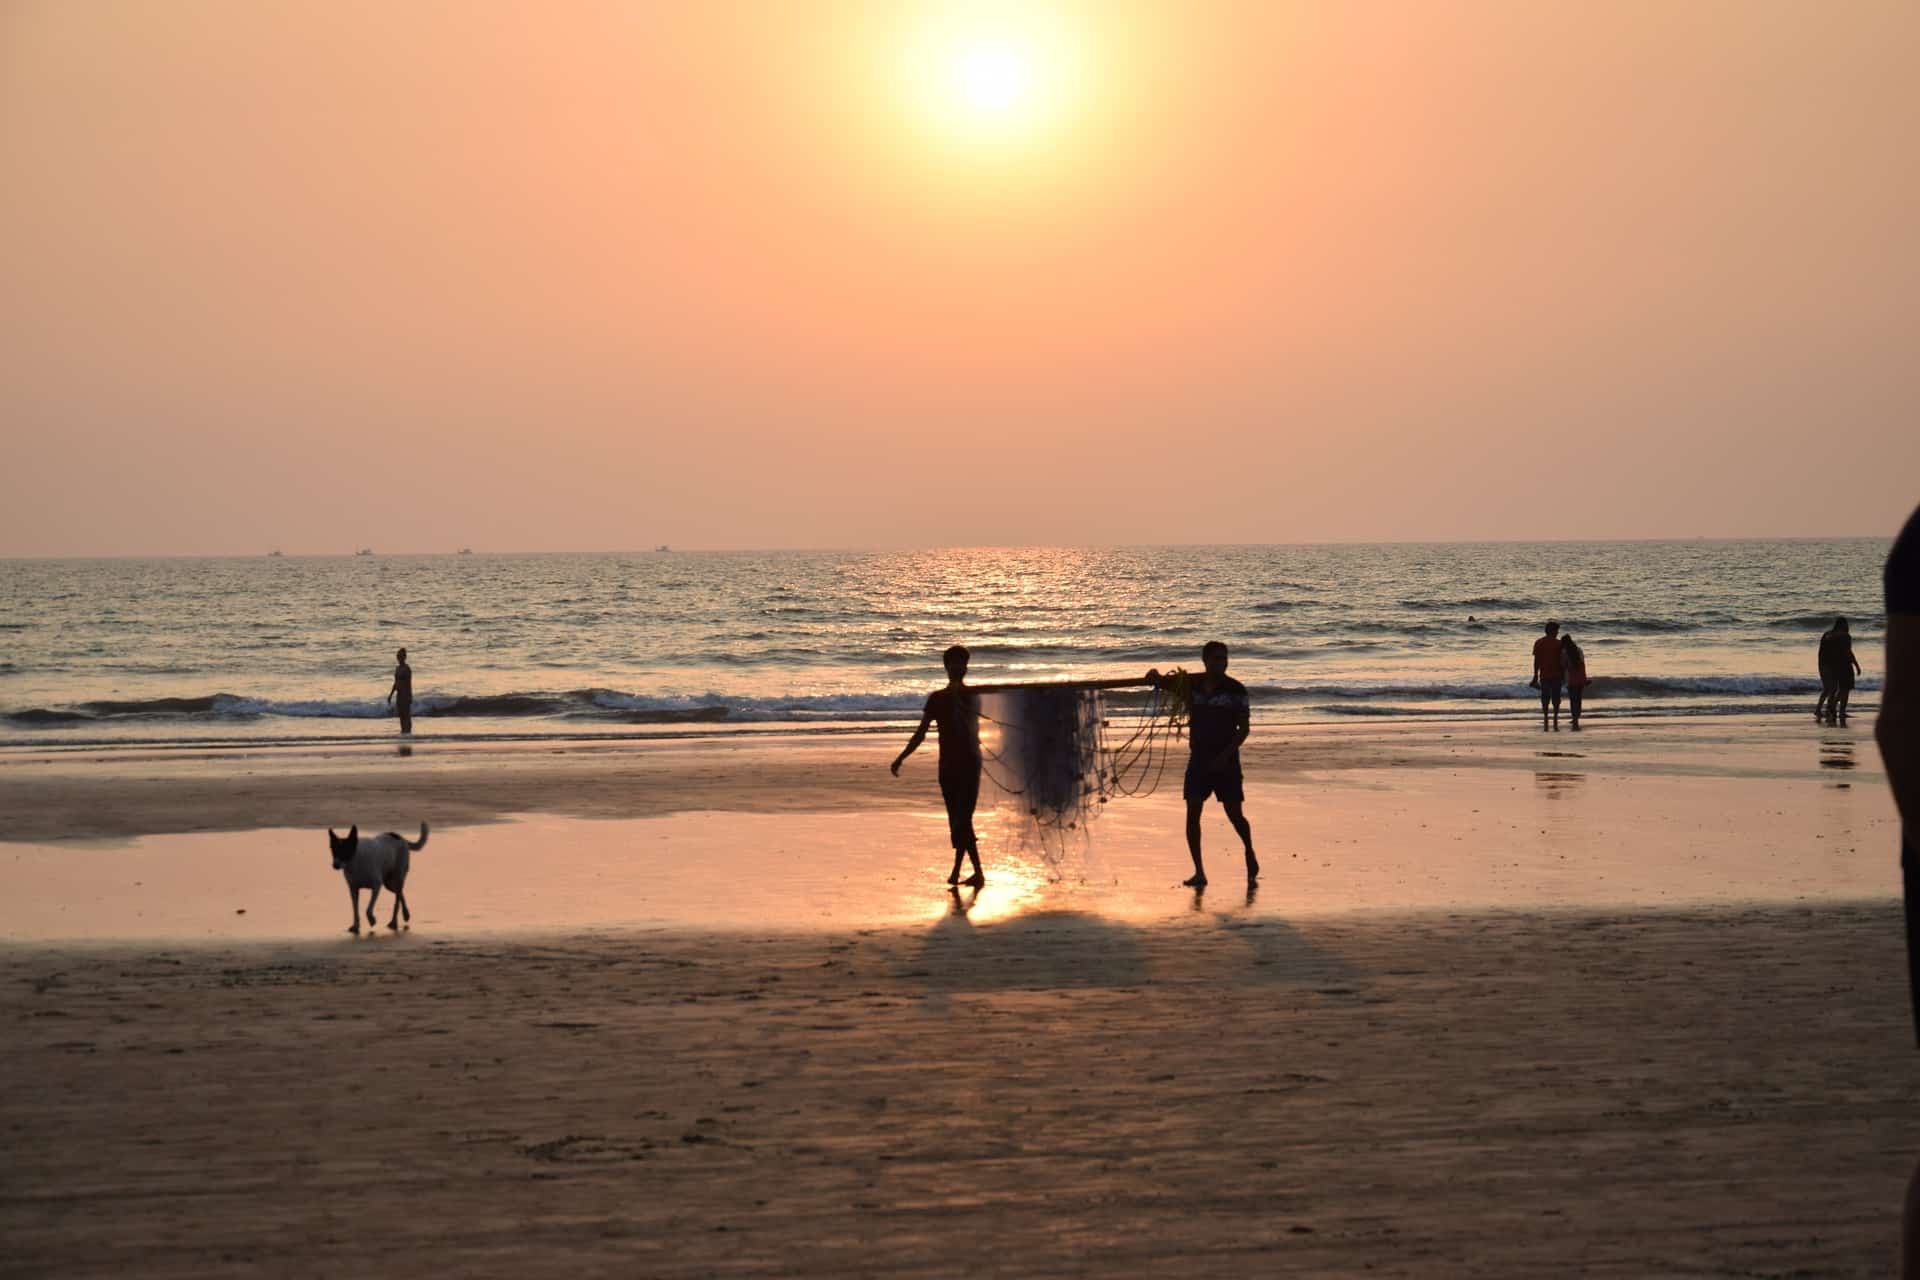 Goa Tourism: How can the declining quality be reversed?